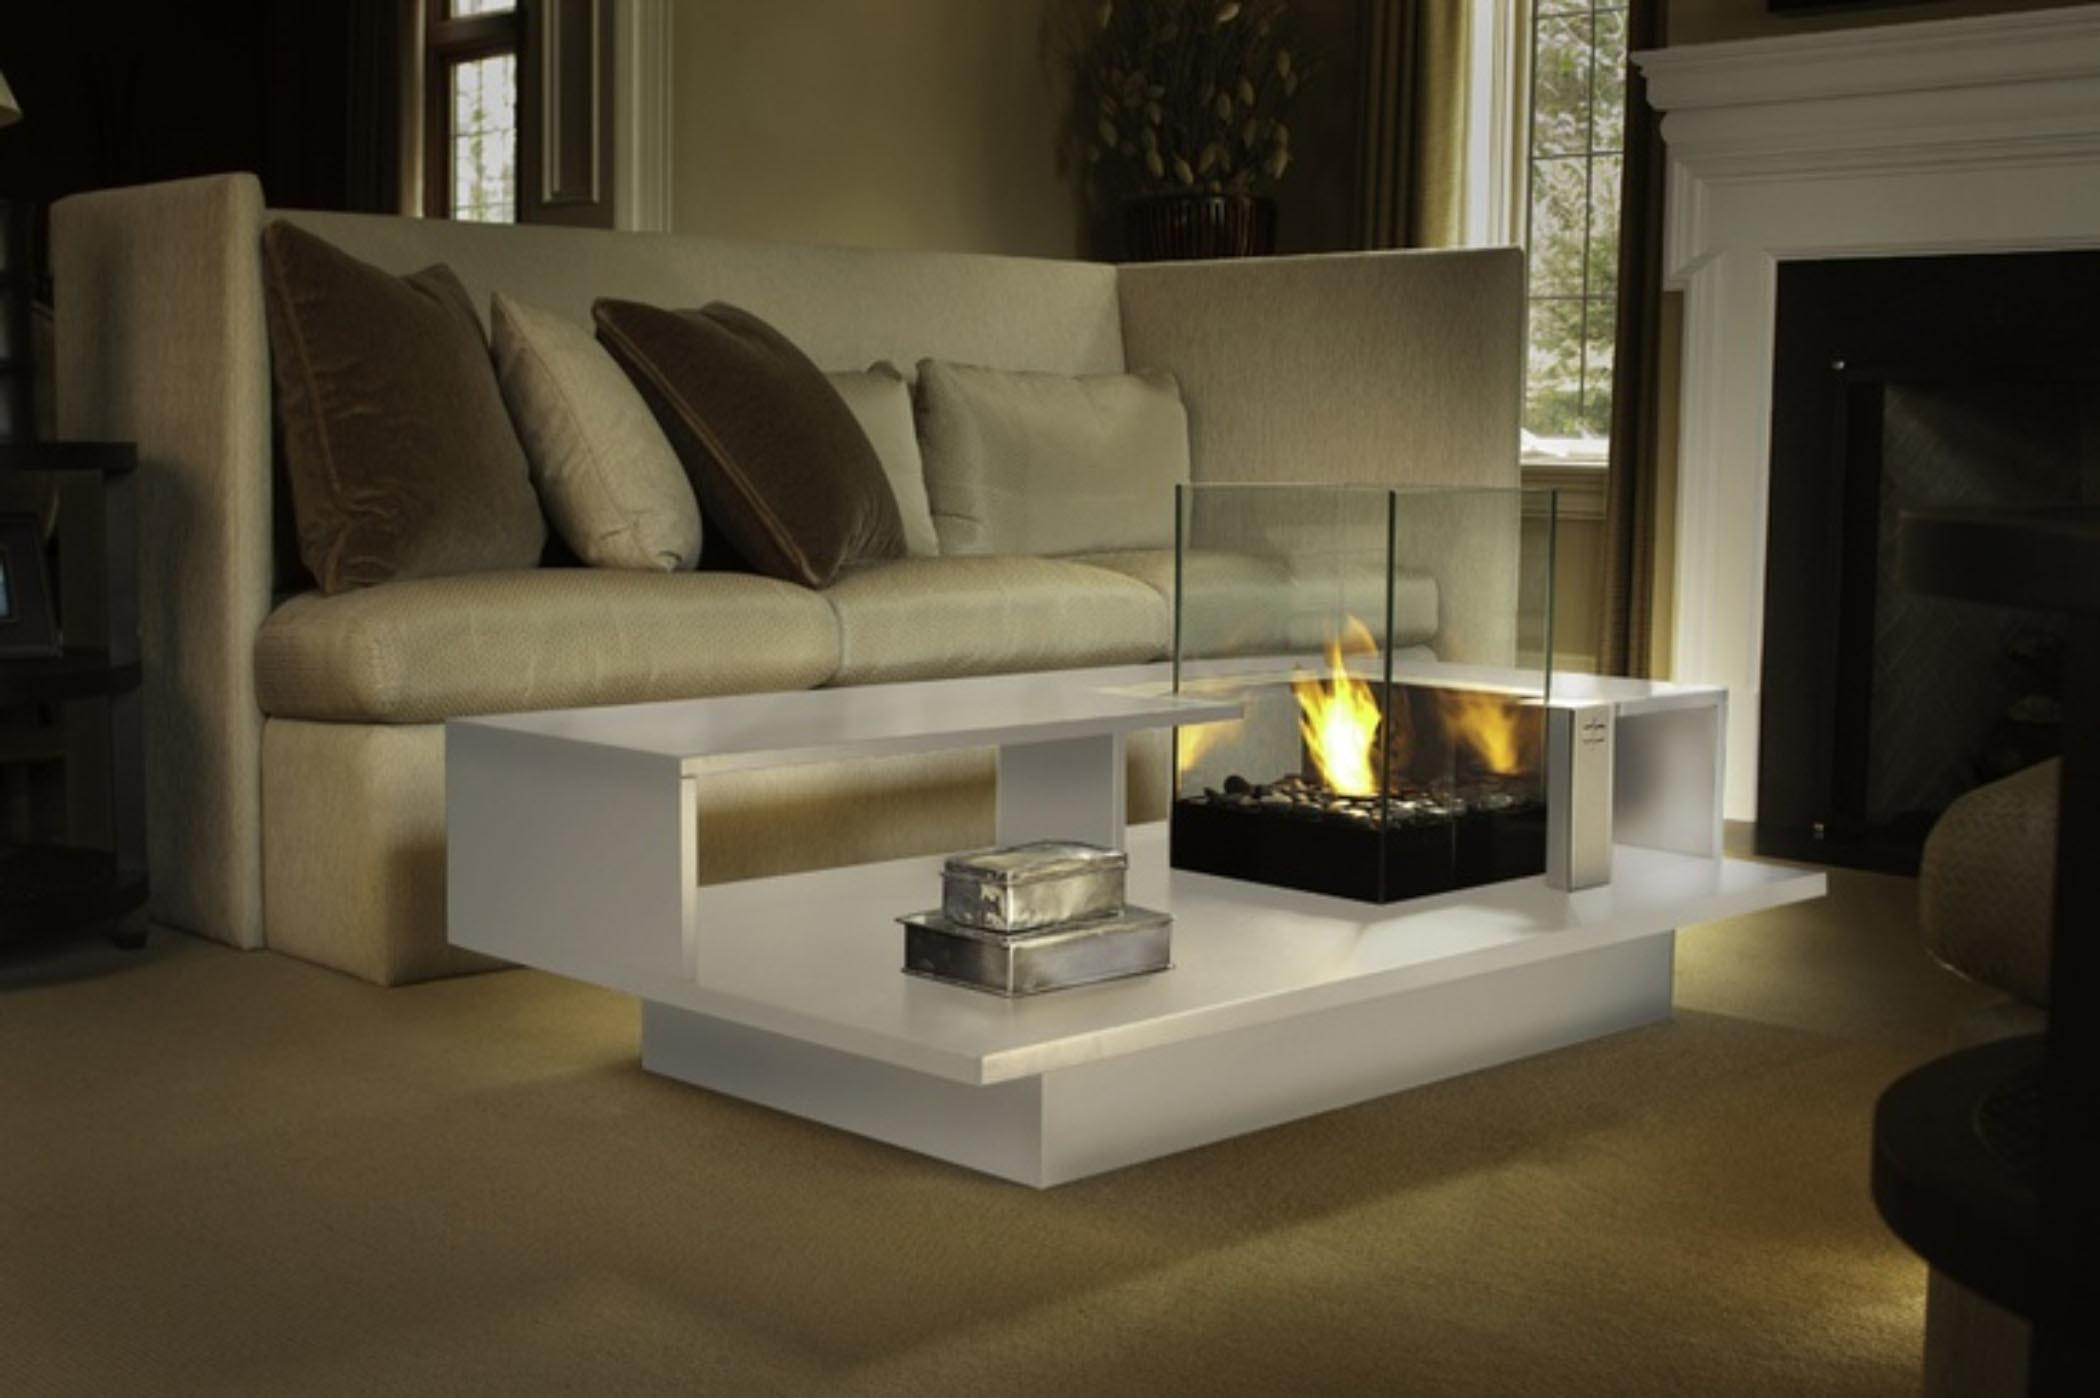 Indoor Fire Pit Coffee Table
 Fire Pit Design Ideas